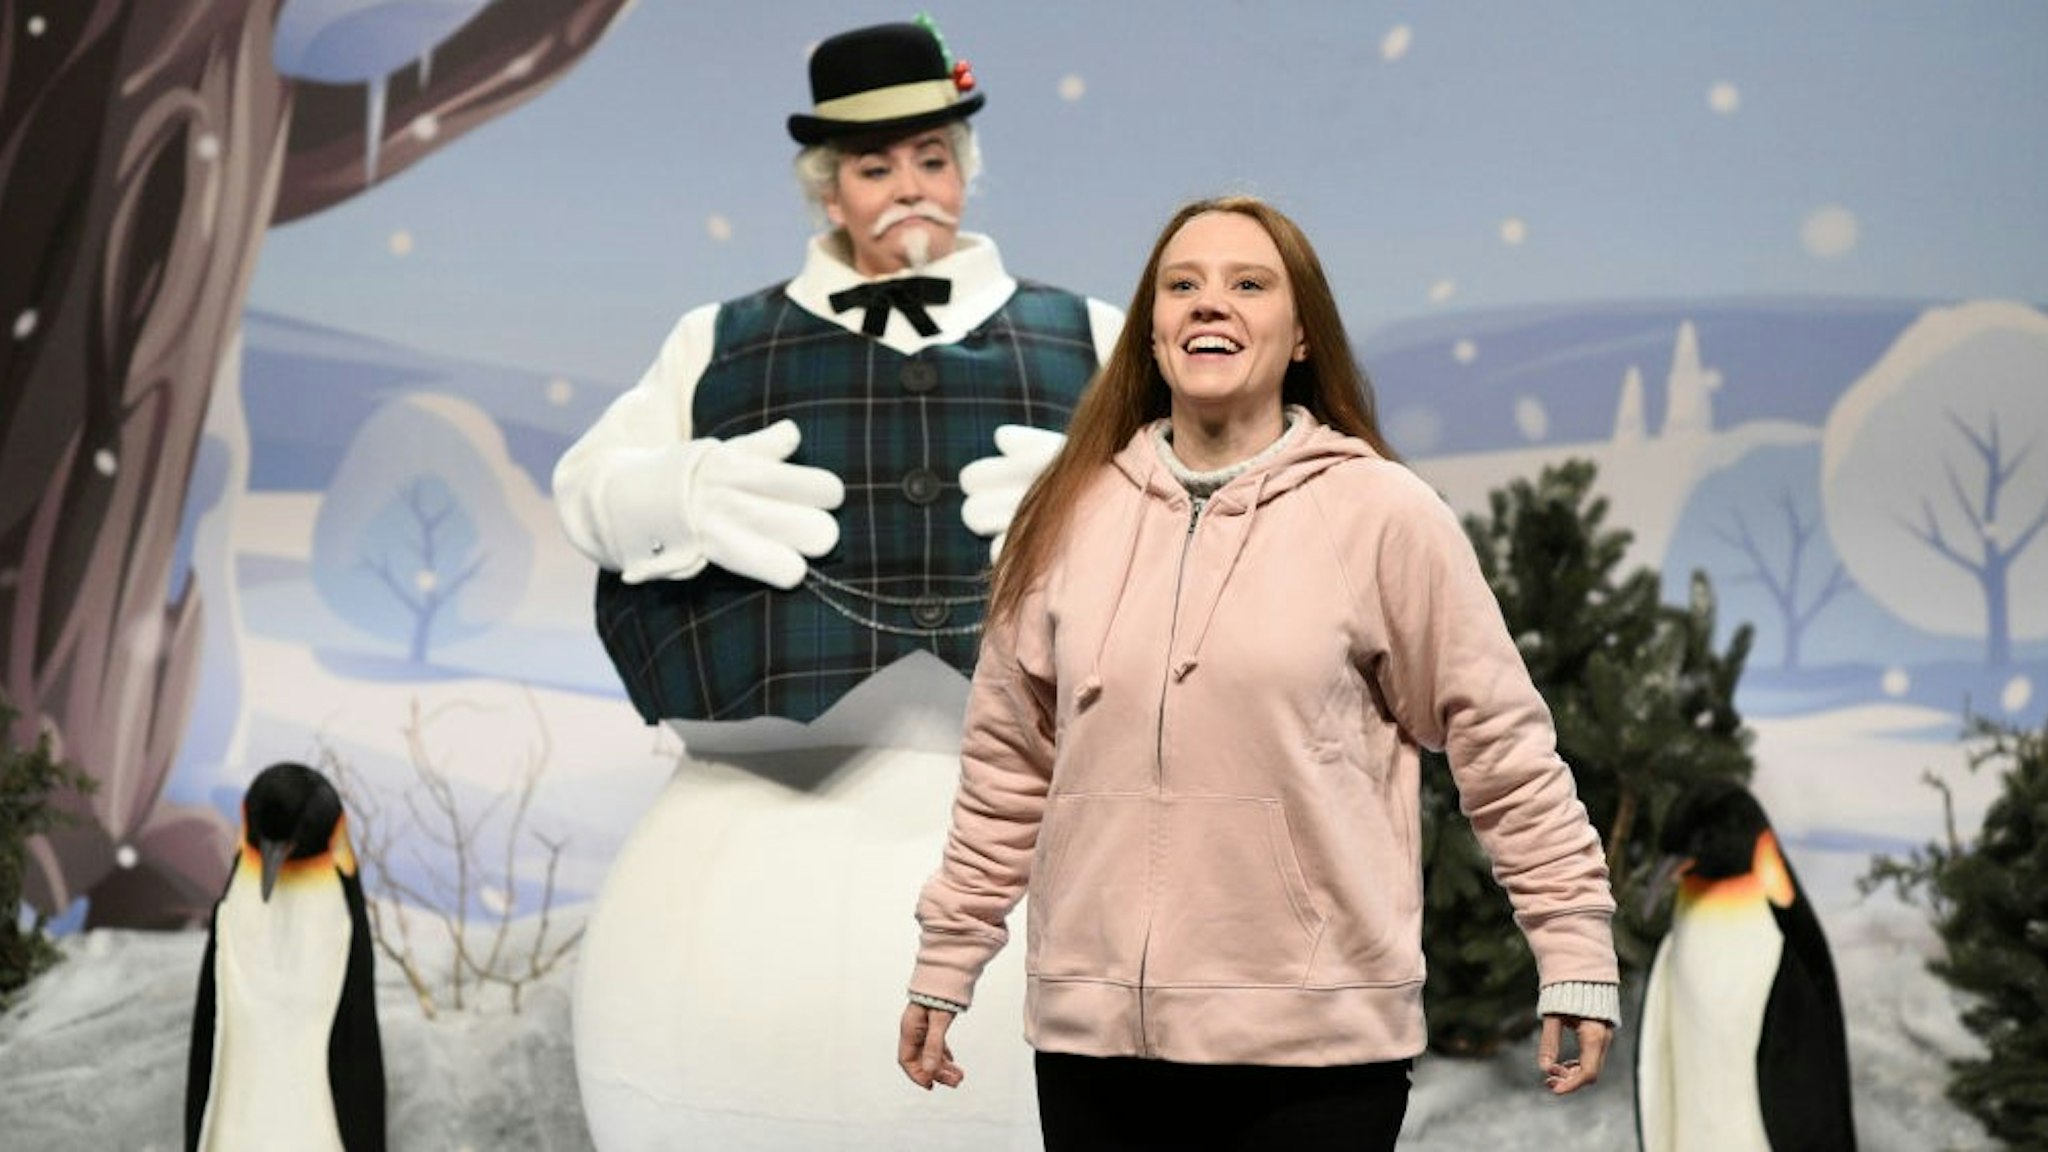 Aidy Bryant as a snowman and Kate McKinnon as Greta Thunberg during the "American Households" Cold Open on Saturday, December 14, 2019